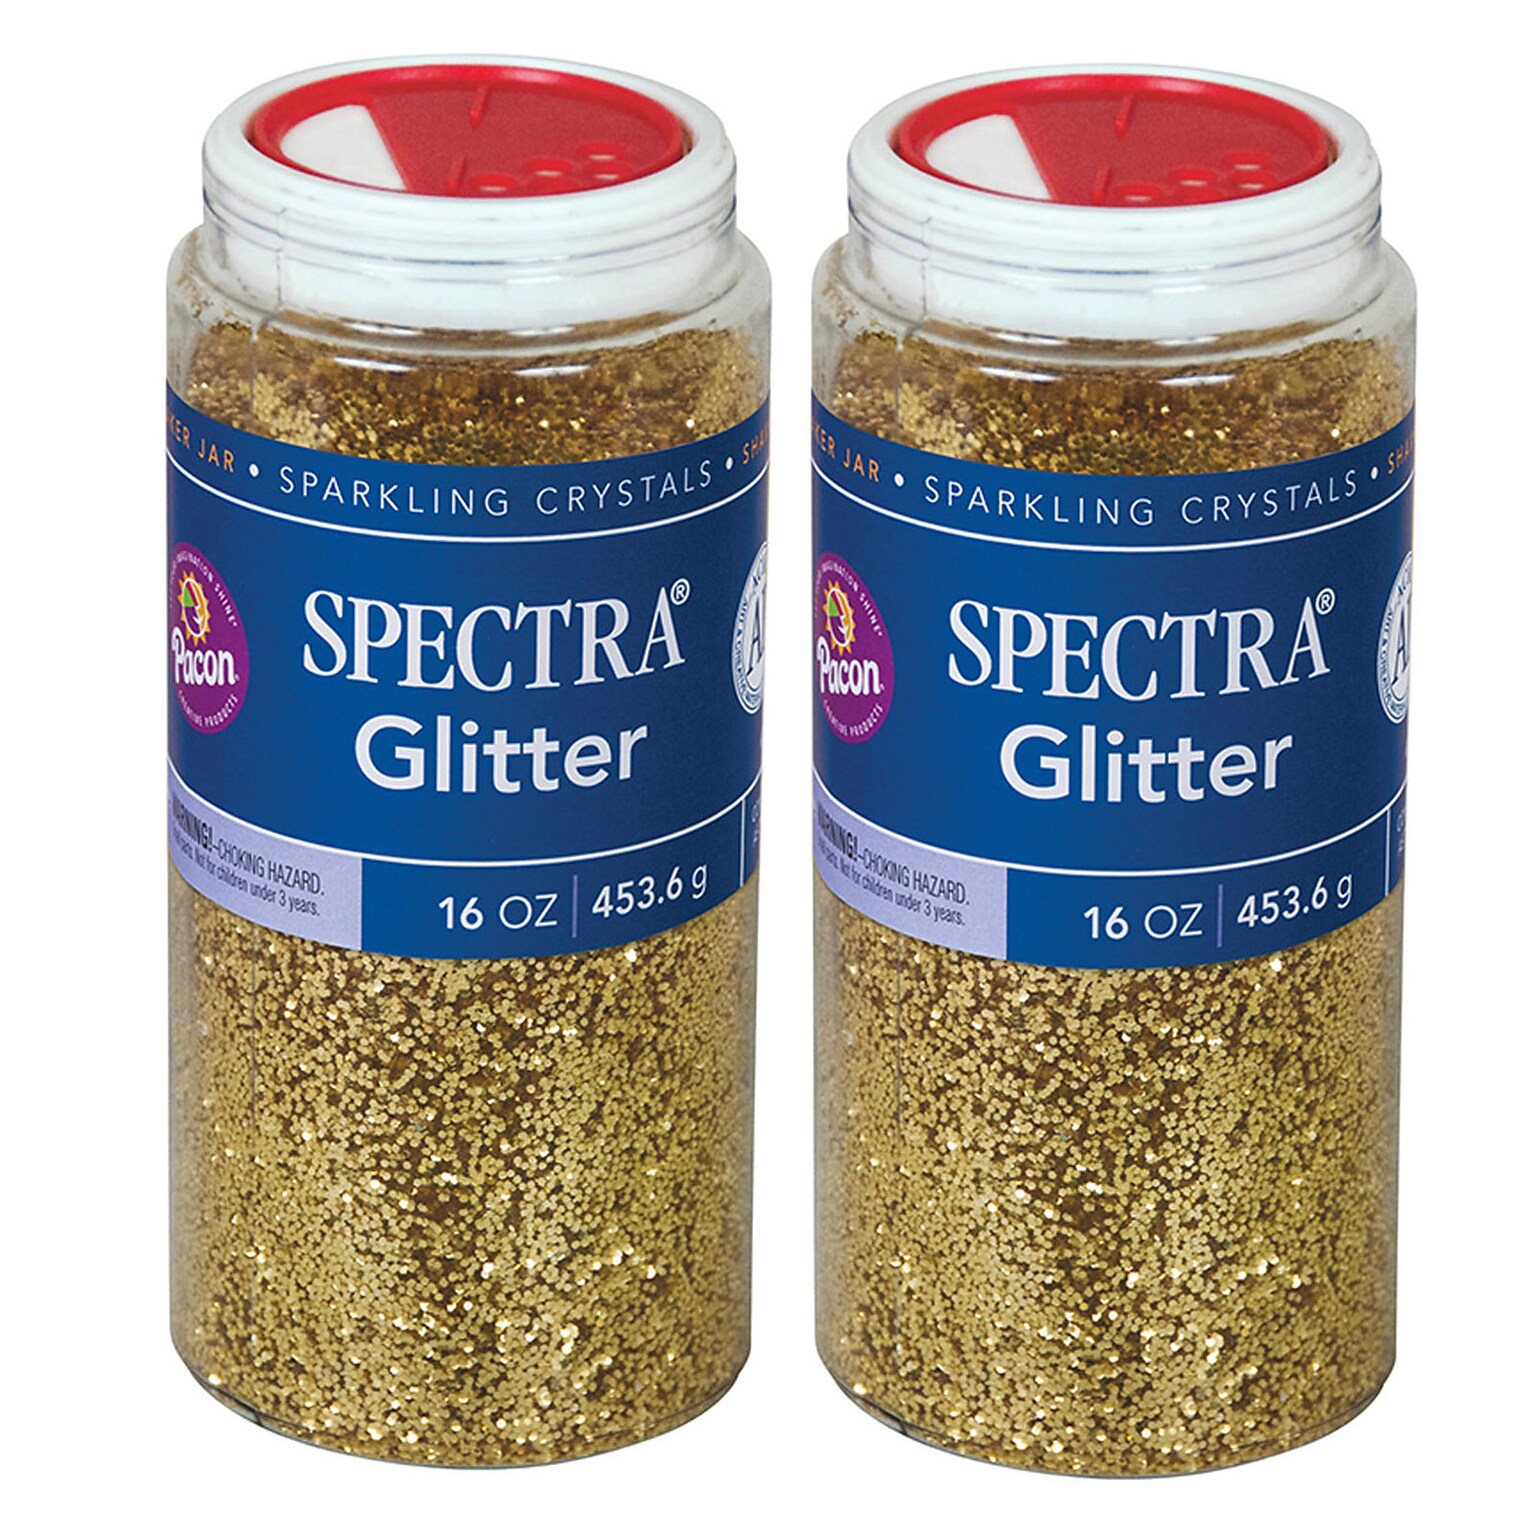 Spectra Glitter, Gold, Pack of 2 (1 lb.) Jars (PAC91780-2)